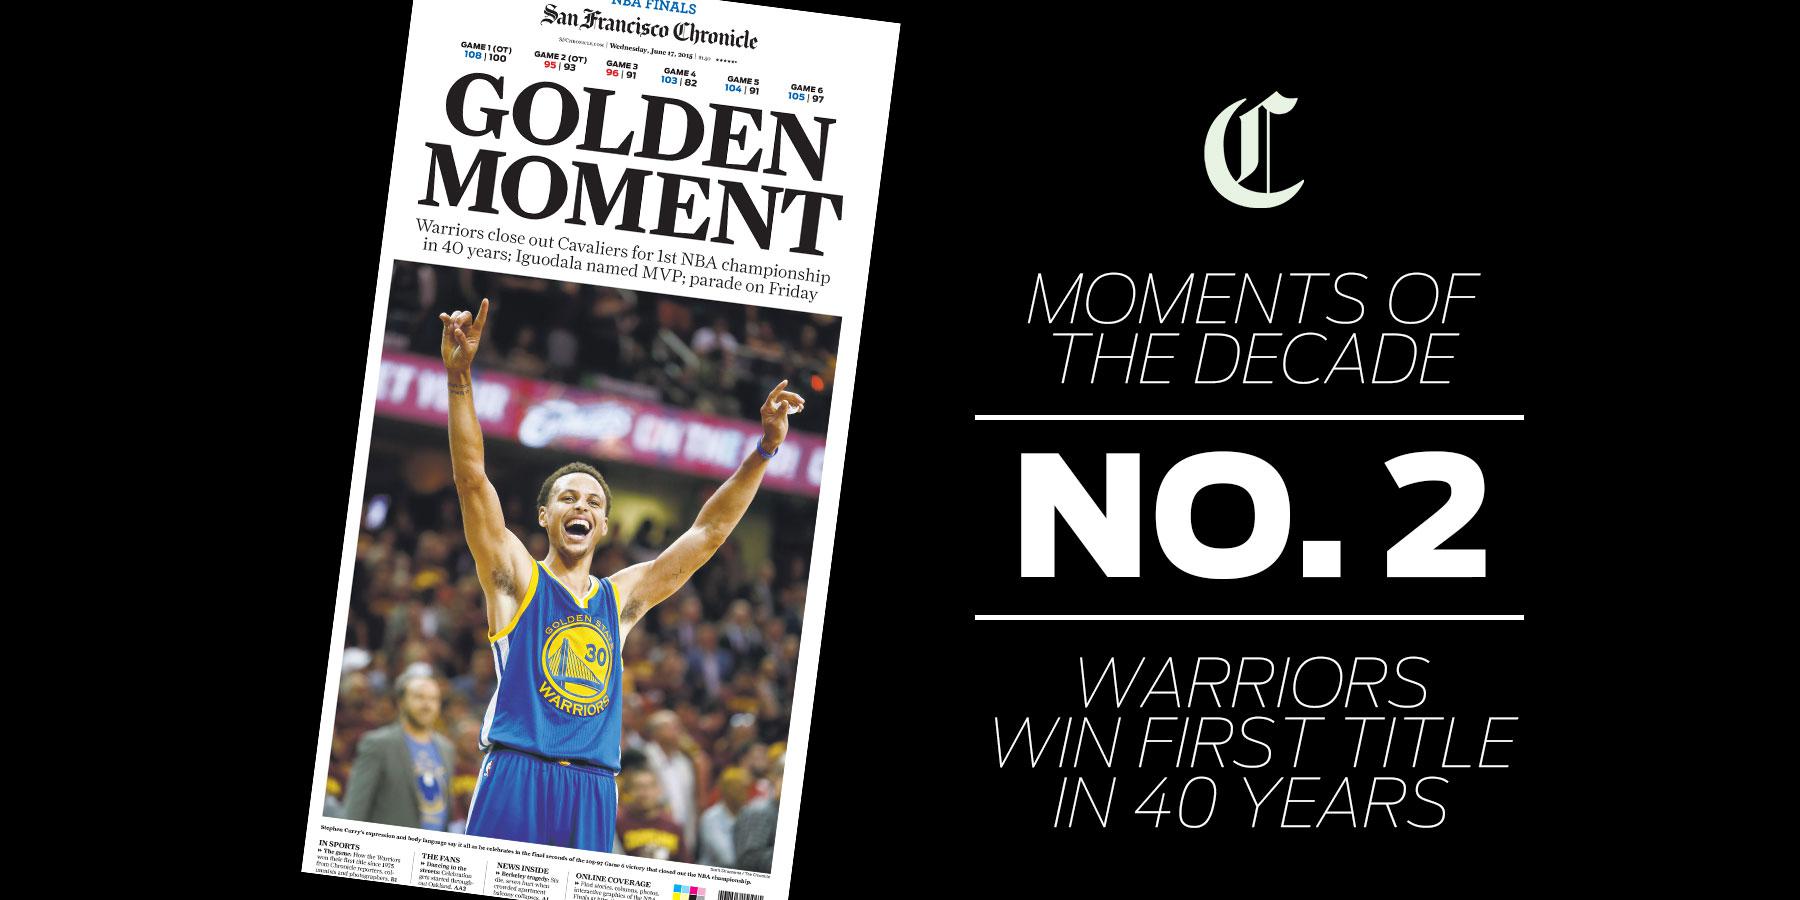 Warriors! - San Francisco Chronicle online store